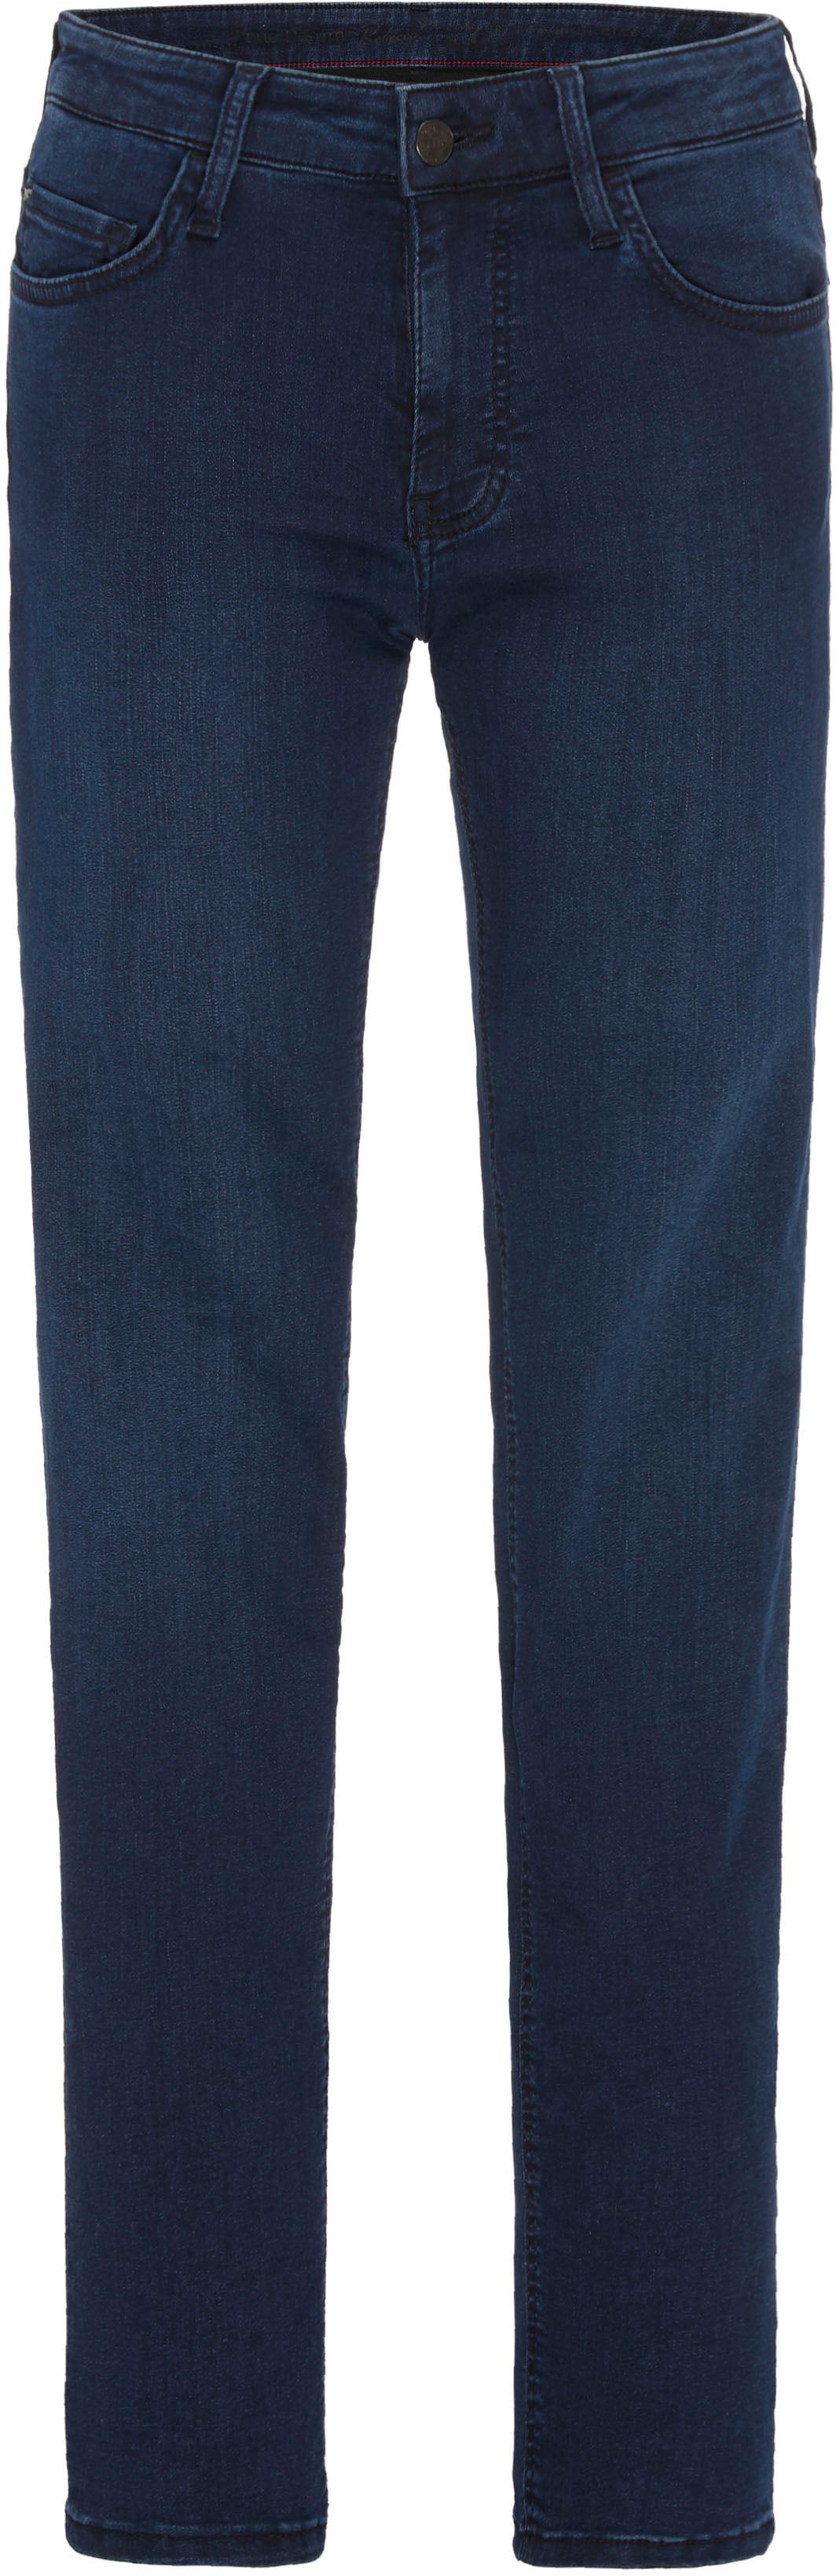 MUSTANG Straight-Jeans »Rebecca« von Mustang